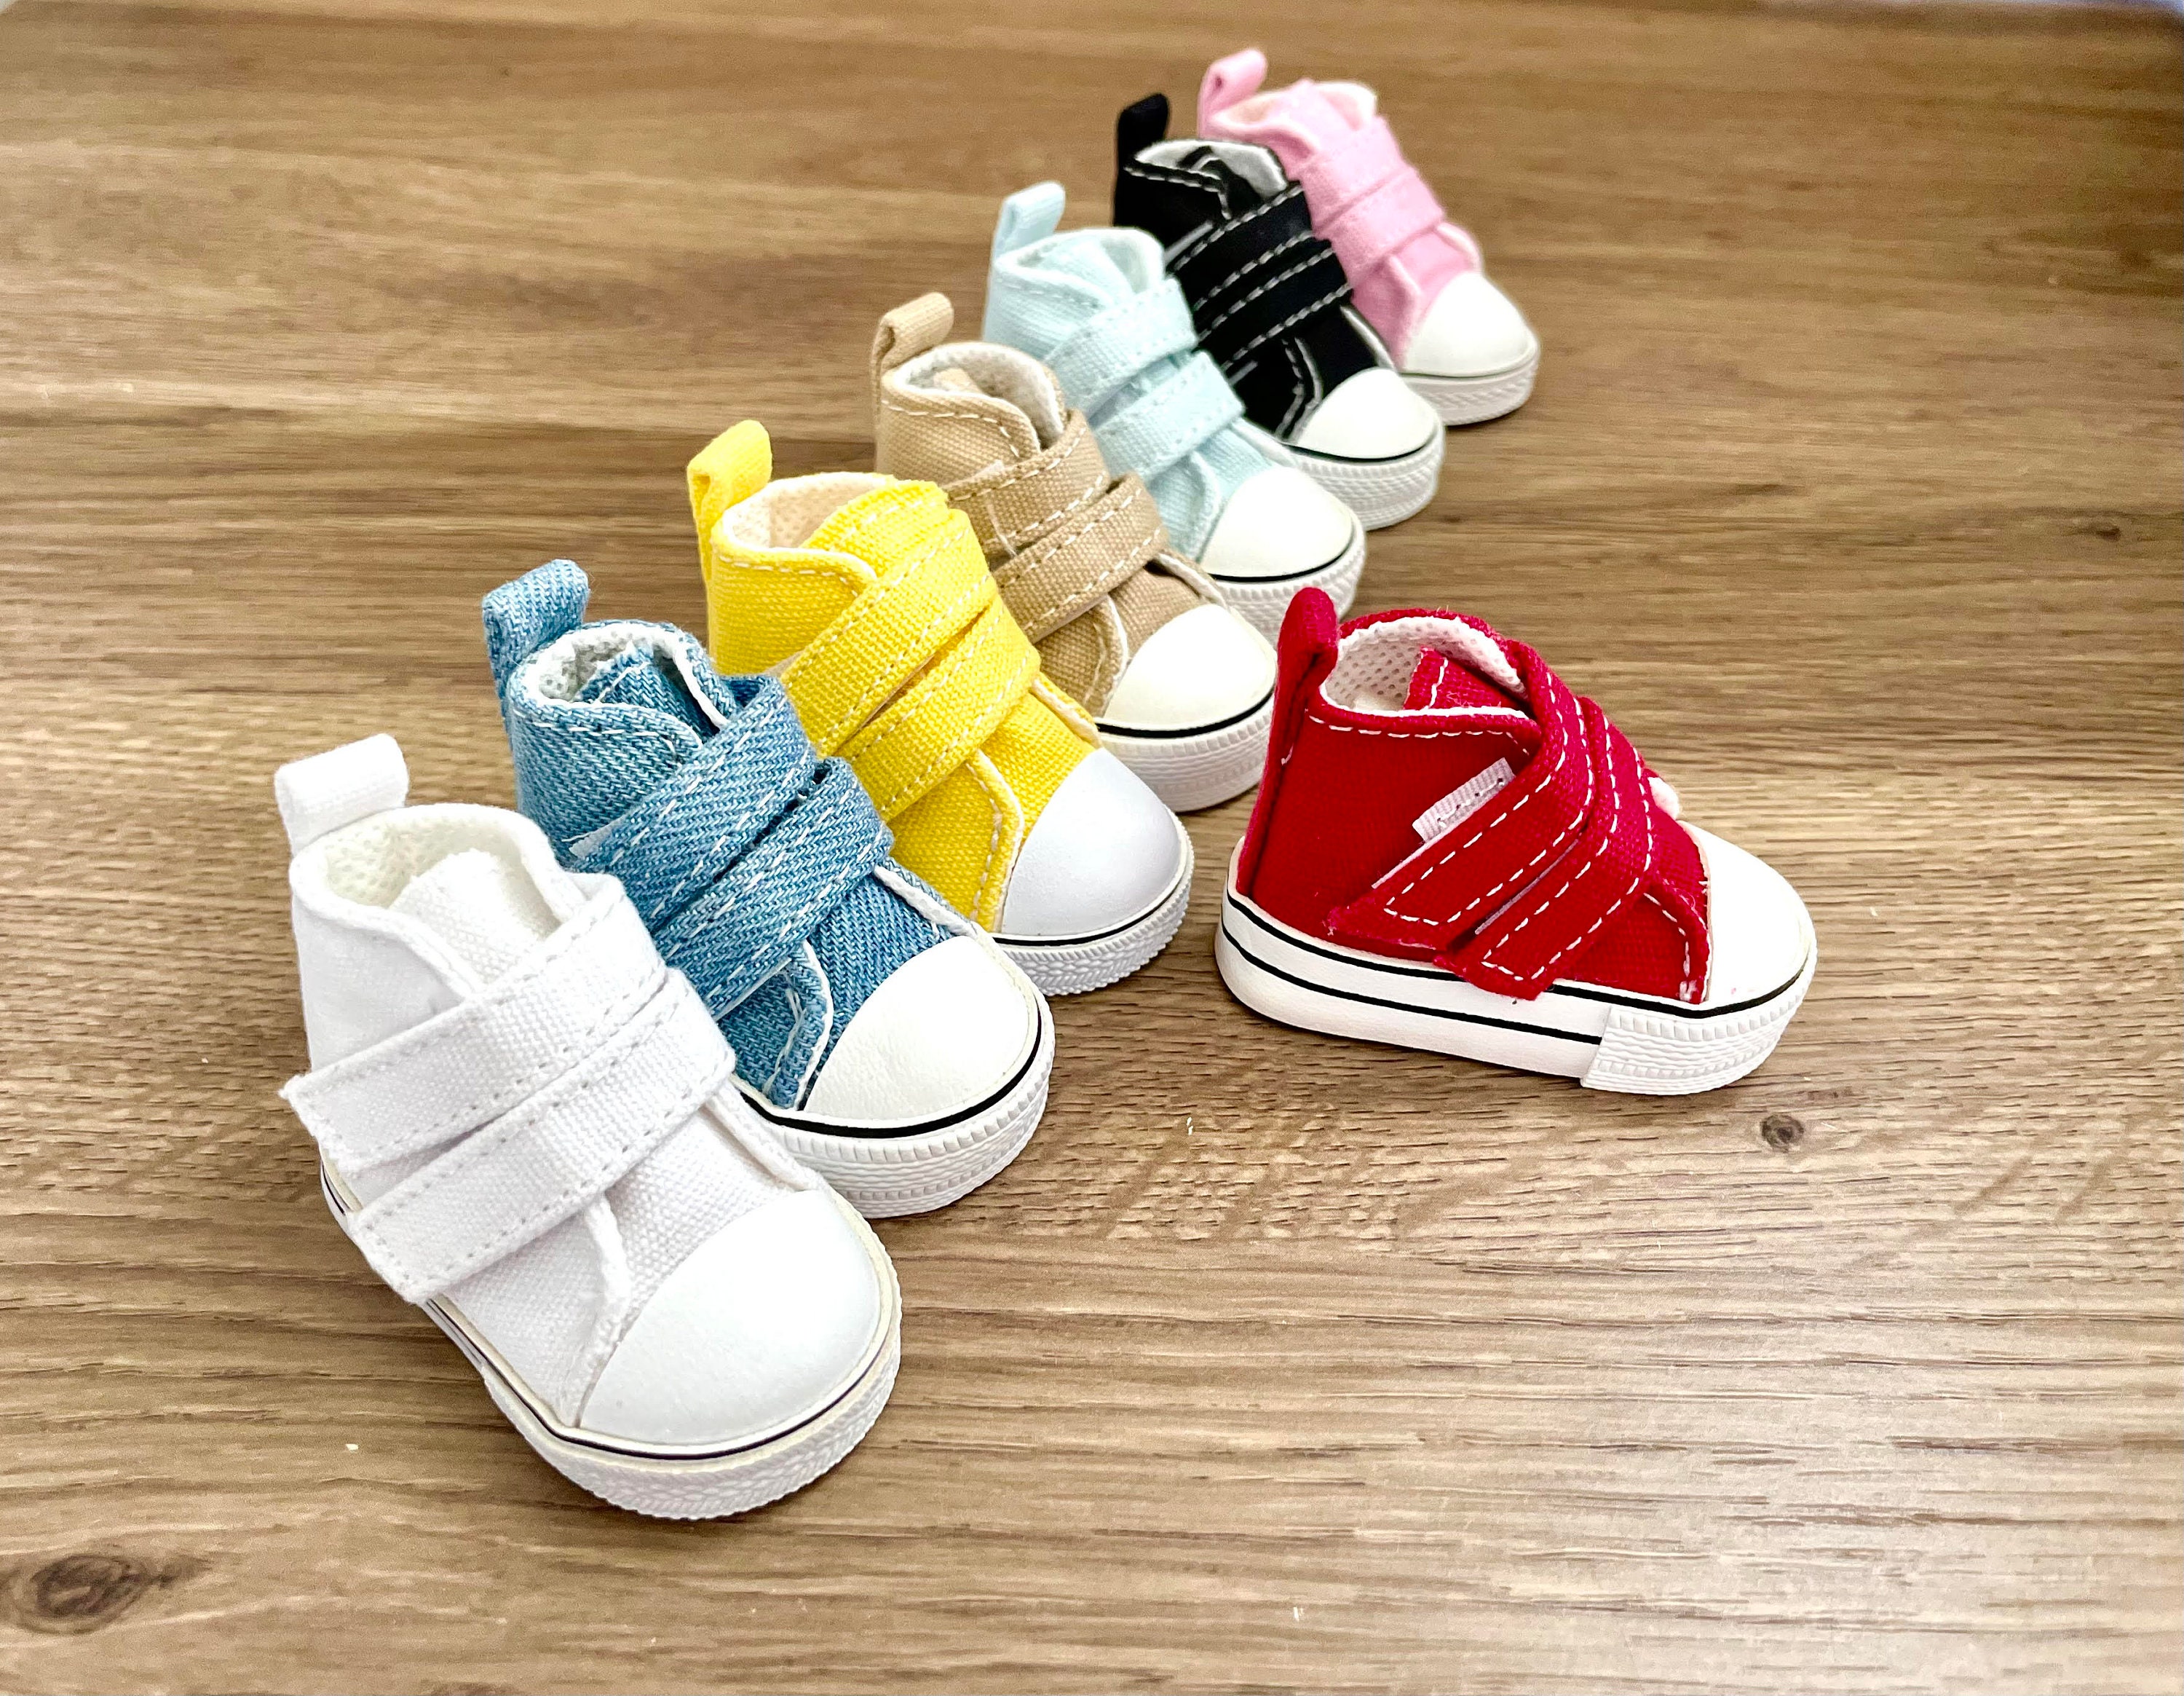 6cm Shoes For Doll Paola Reina Fashion Sneakers For Dolls Footwear Toy B3P6 T0P6 